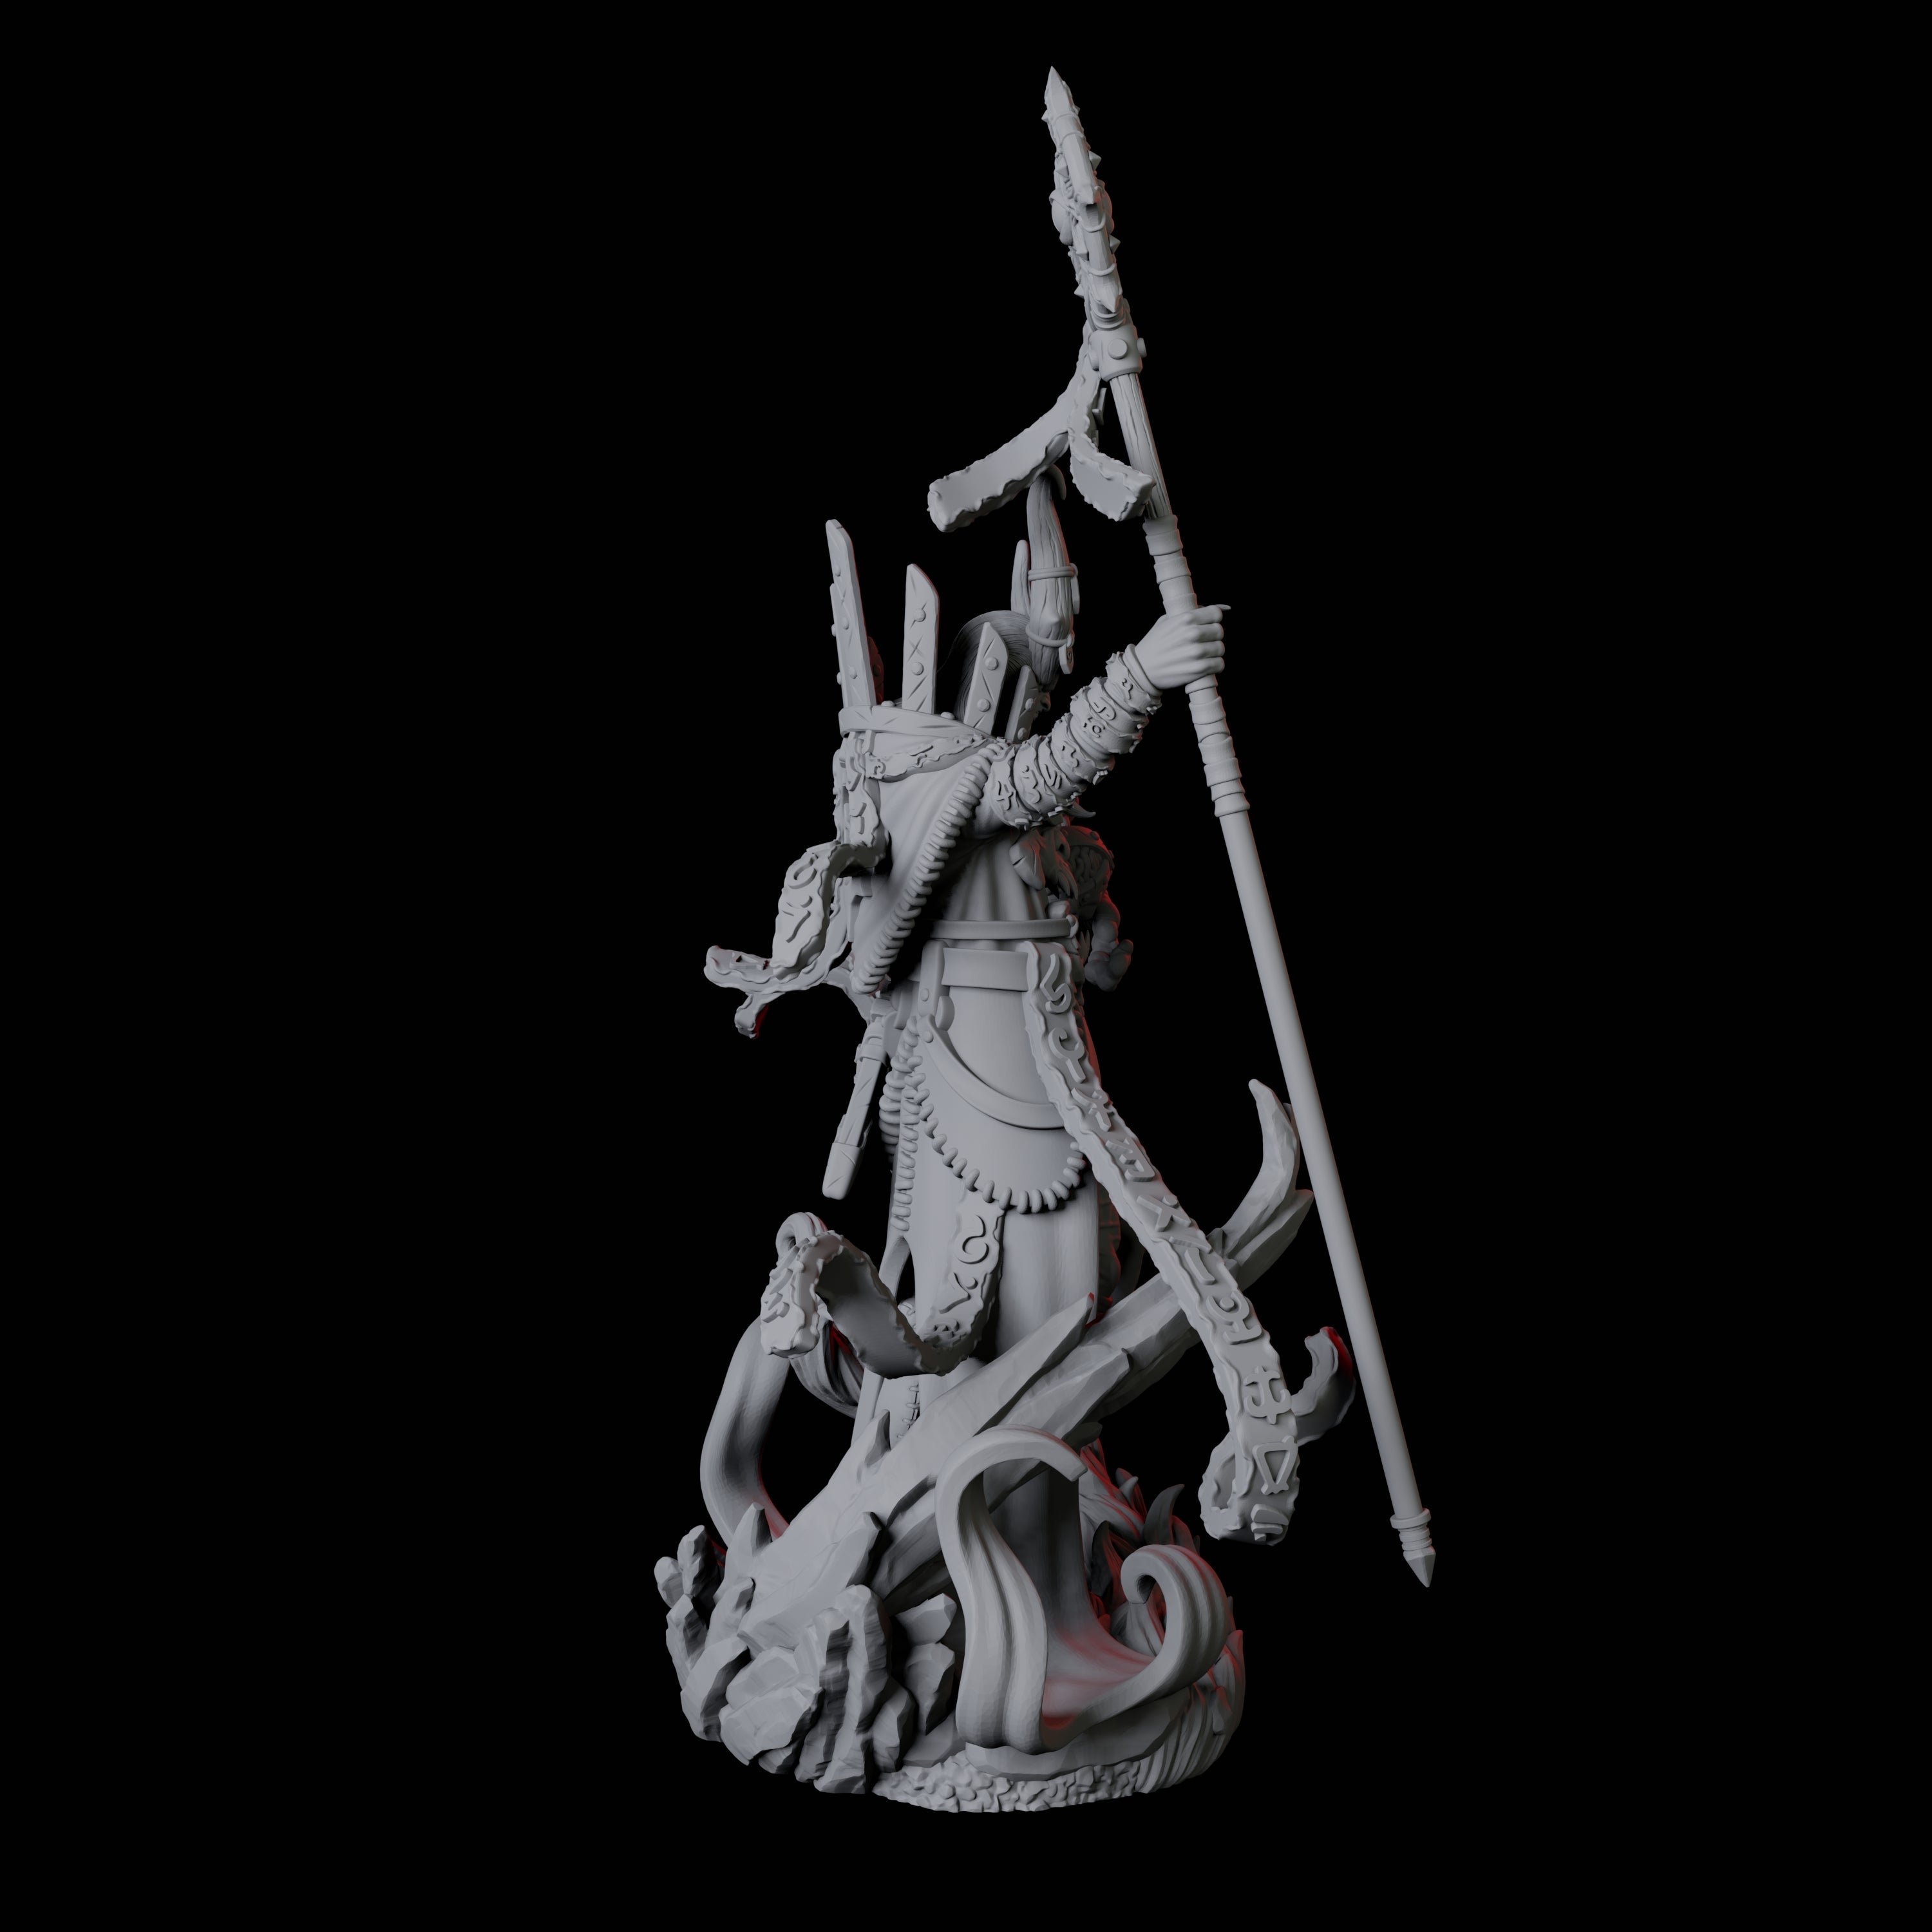 Casting Warlock Miniature for Dungeons and Dragons, Pathfinder or other TTRPGs